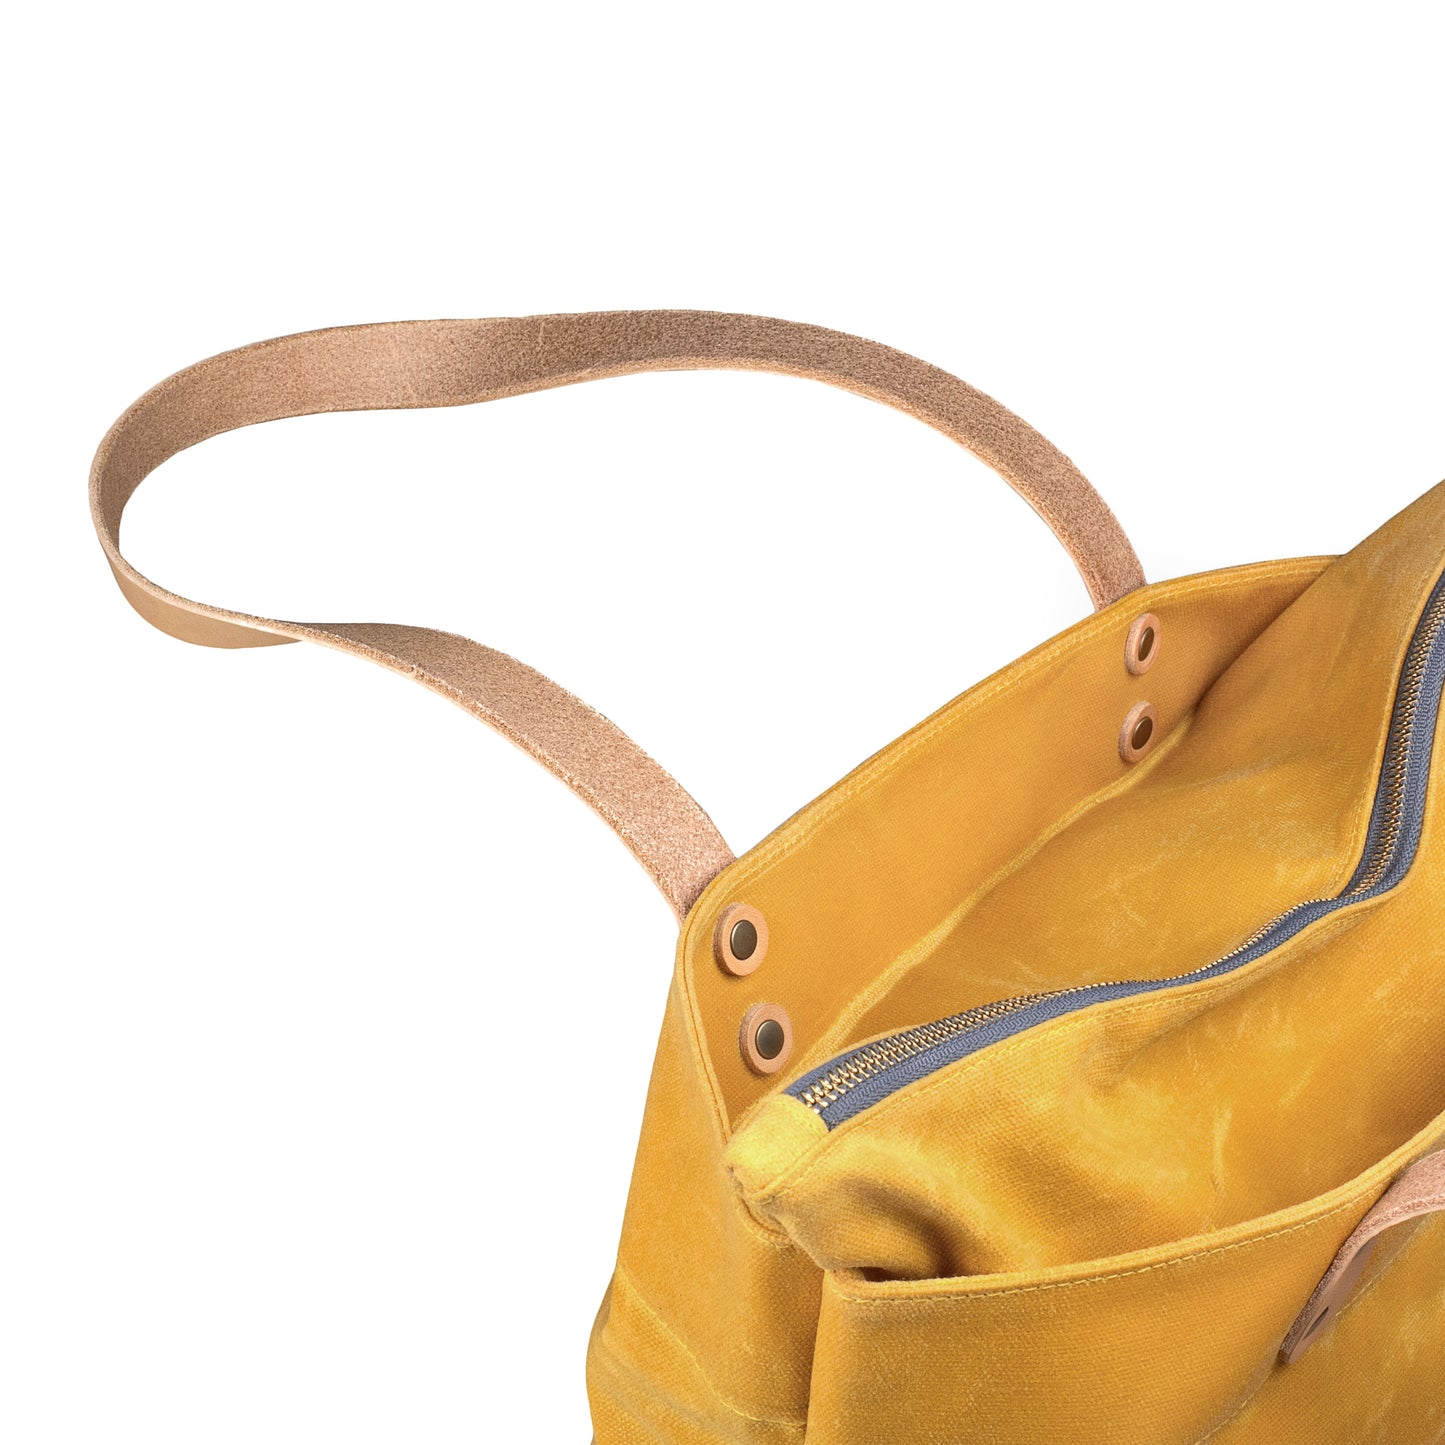 Zipper Tote Yellow Waxed Canvas & Natural Leather